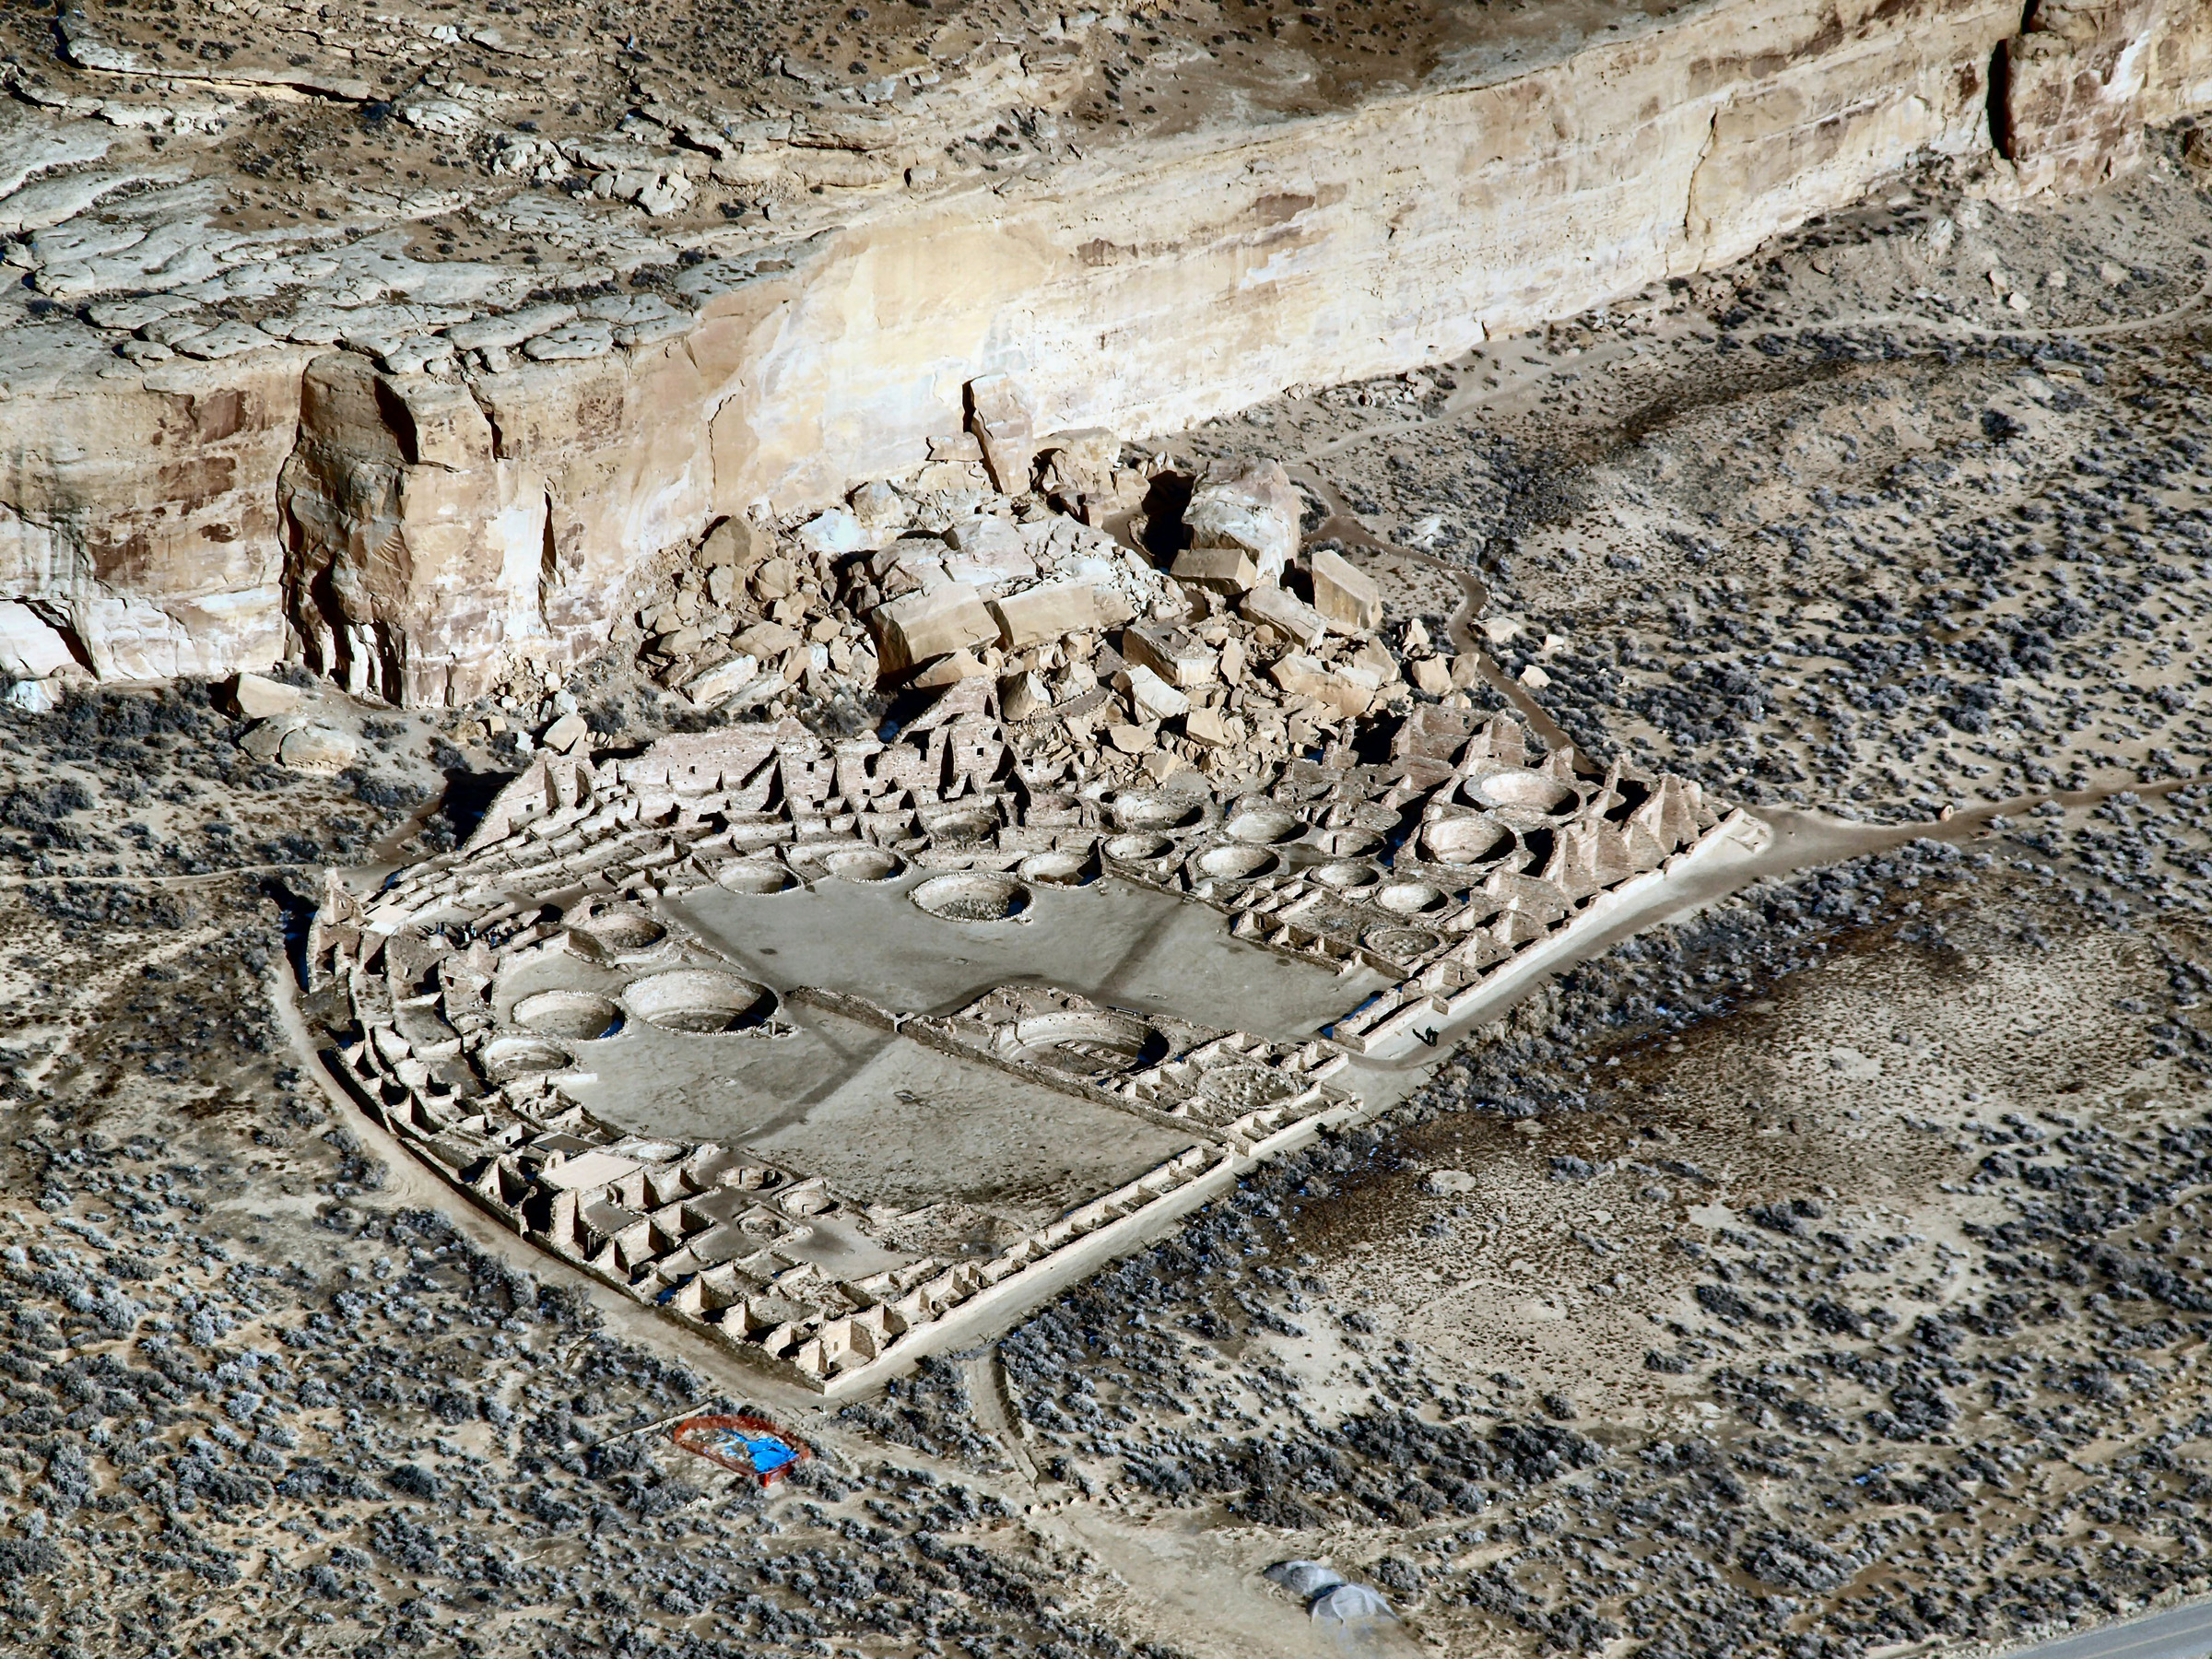 Archaeology and Place at Chaco Canyon